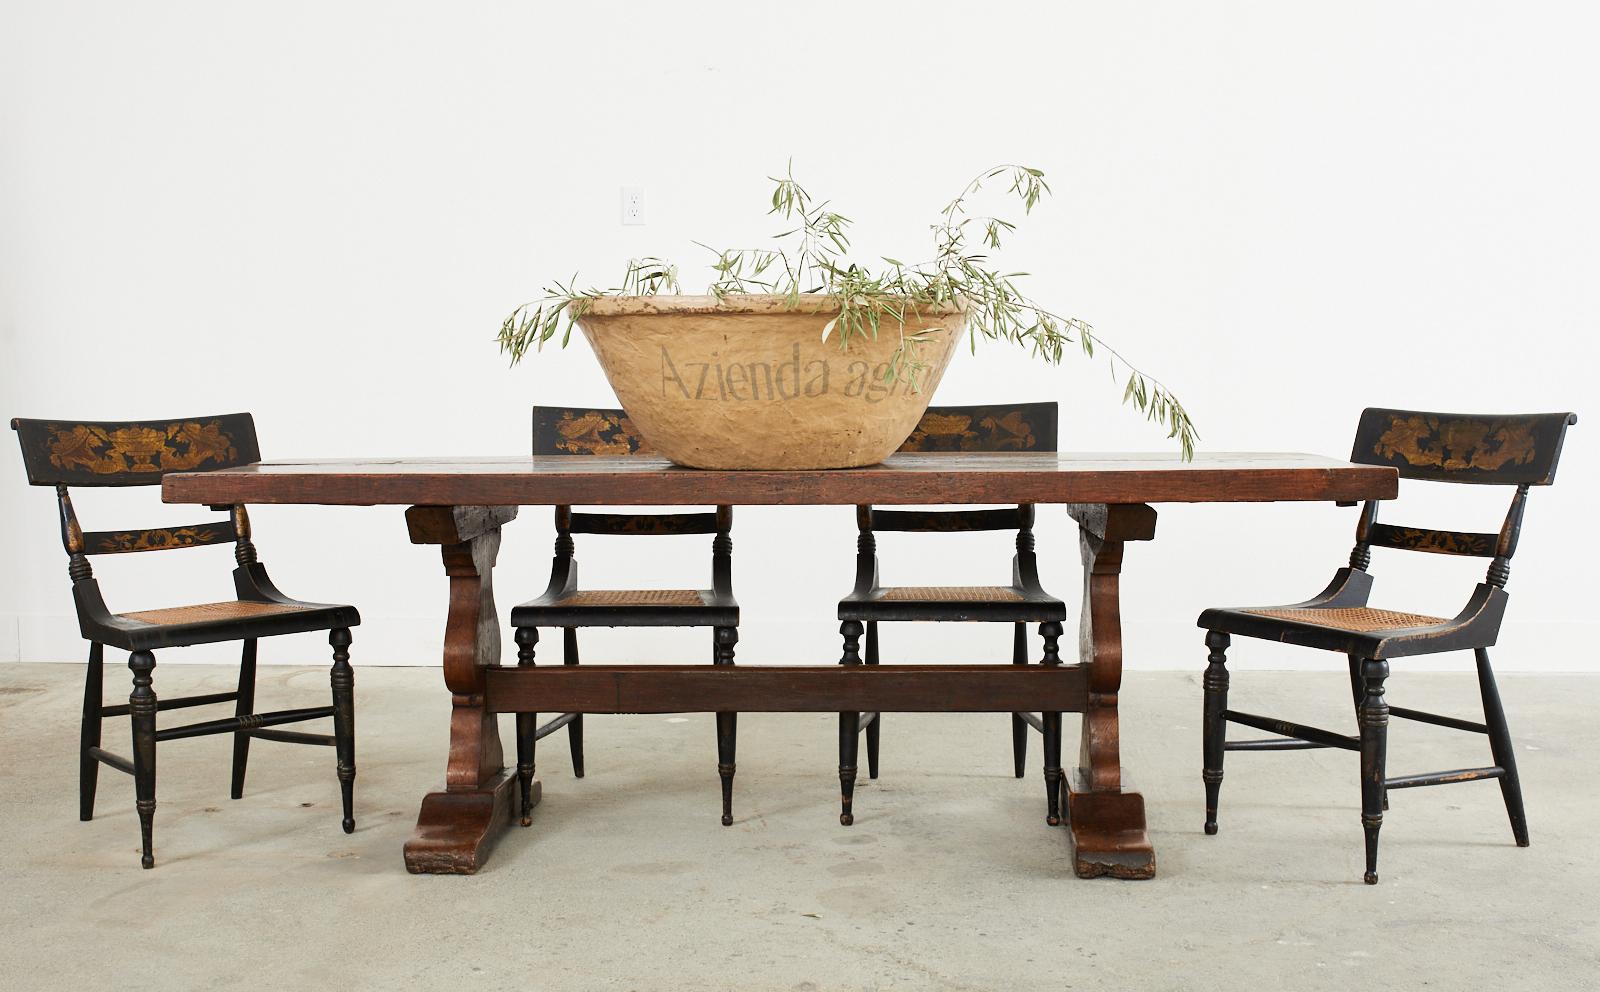 Rustic 18th century country French provincial farmhouse trestle dining table or refectory table crafted from hand-hewn oak featuring a 2.25 inch thick top. The trestle style base is constructed with an exposed mortise and tenon joinery. The thick